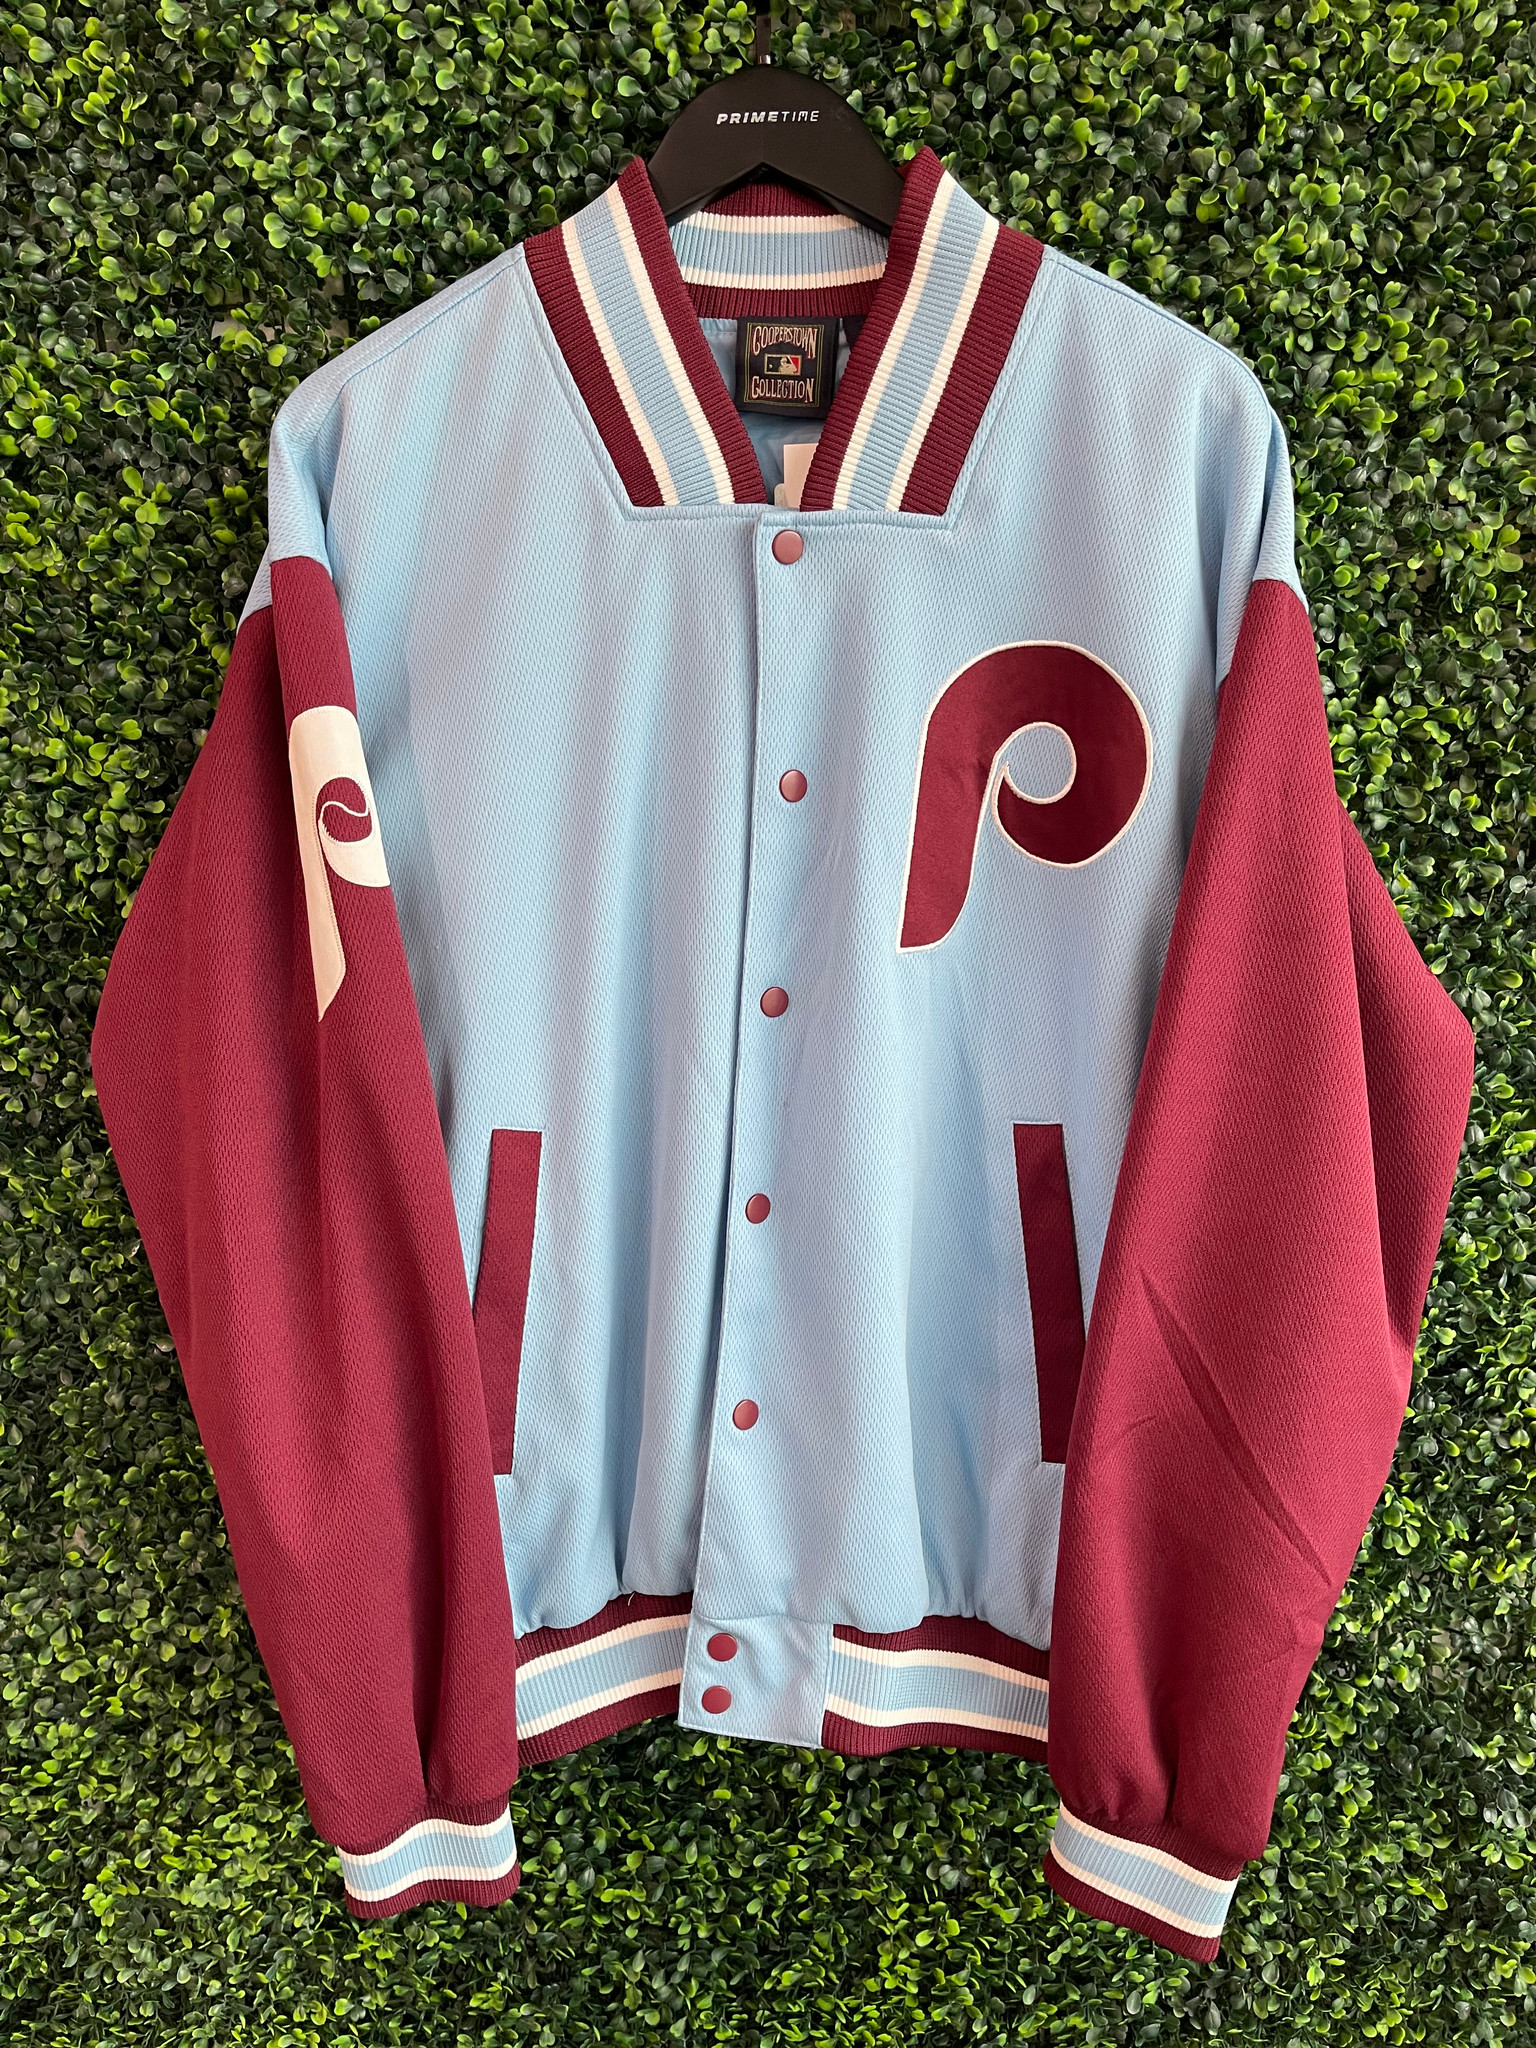 Mitchell & Ness Philadelphia Phillies Cooperstown Collection Broad  Street Track Jacket - Maroon